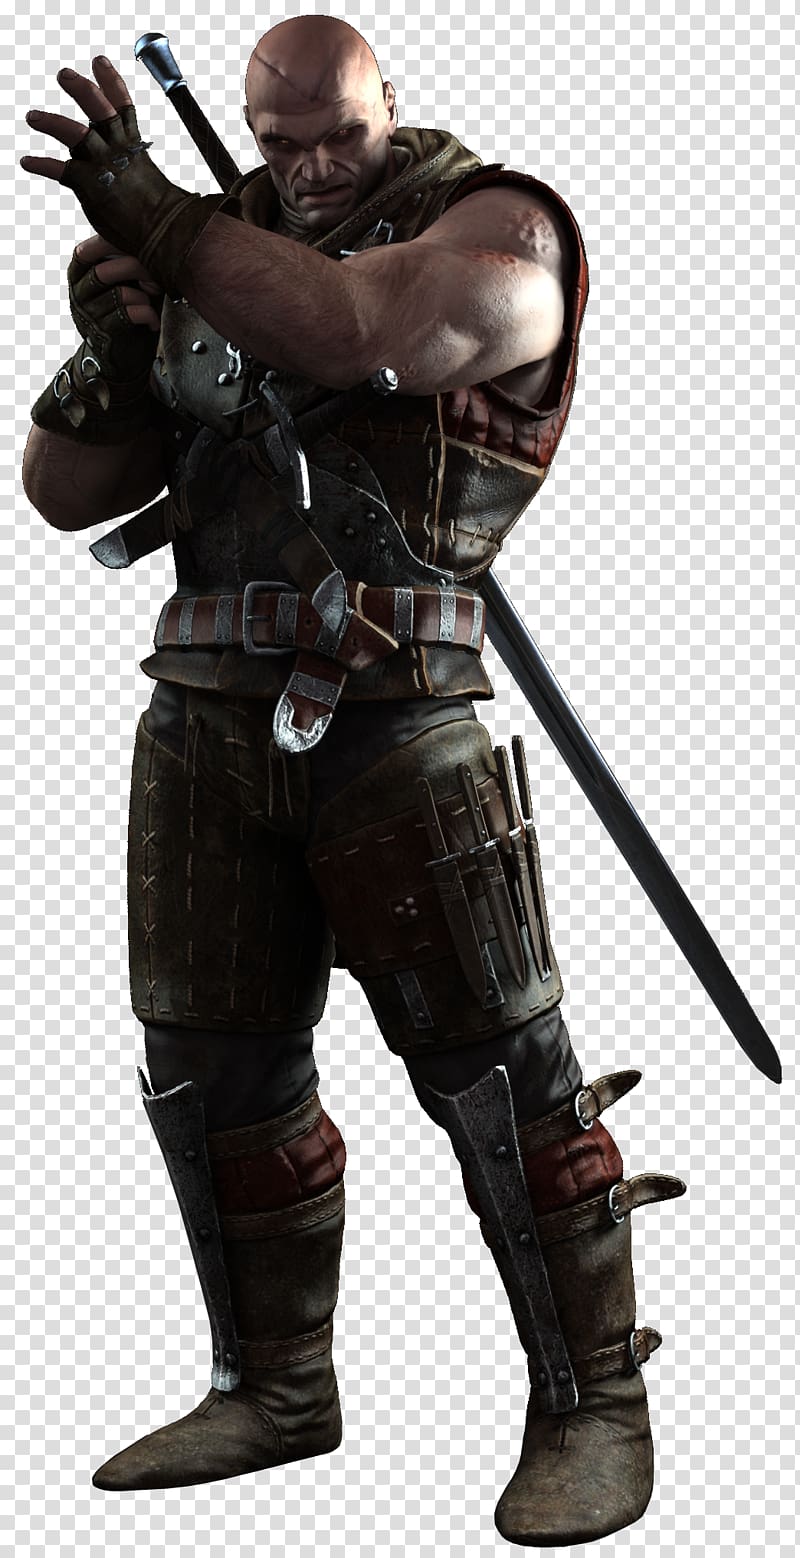 The Witcher 2: Assassins of Kings The Witcher 3: Wild Hunt Geralt of Rivia Video game, the witcher transparent background PNG clipart